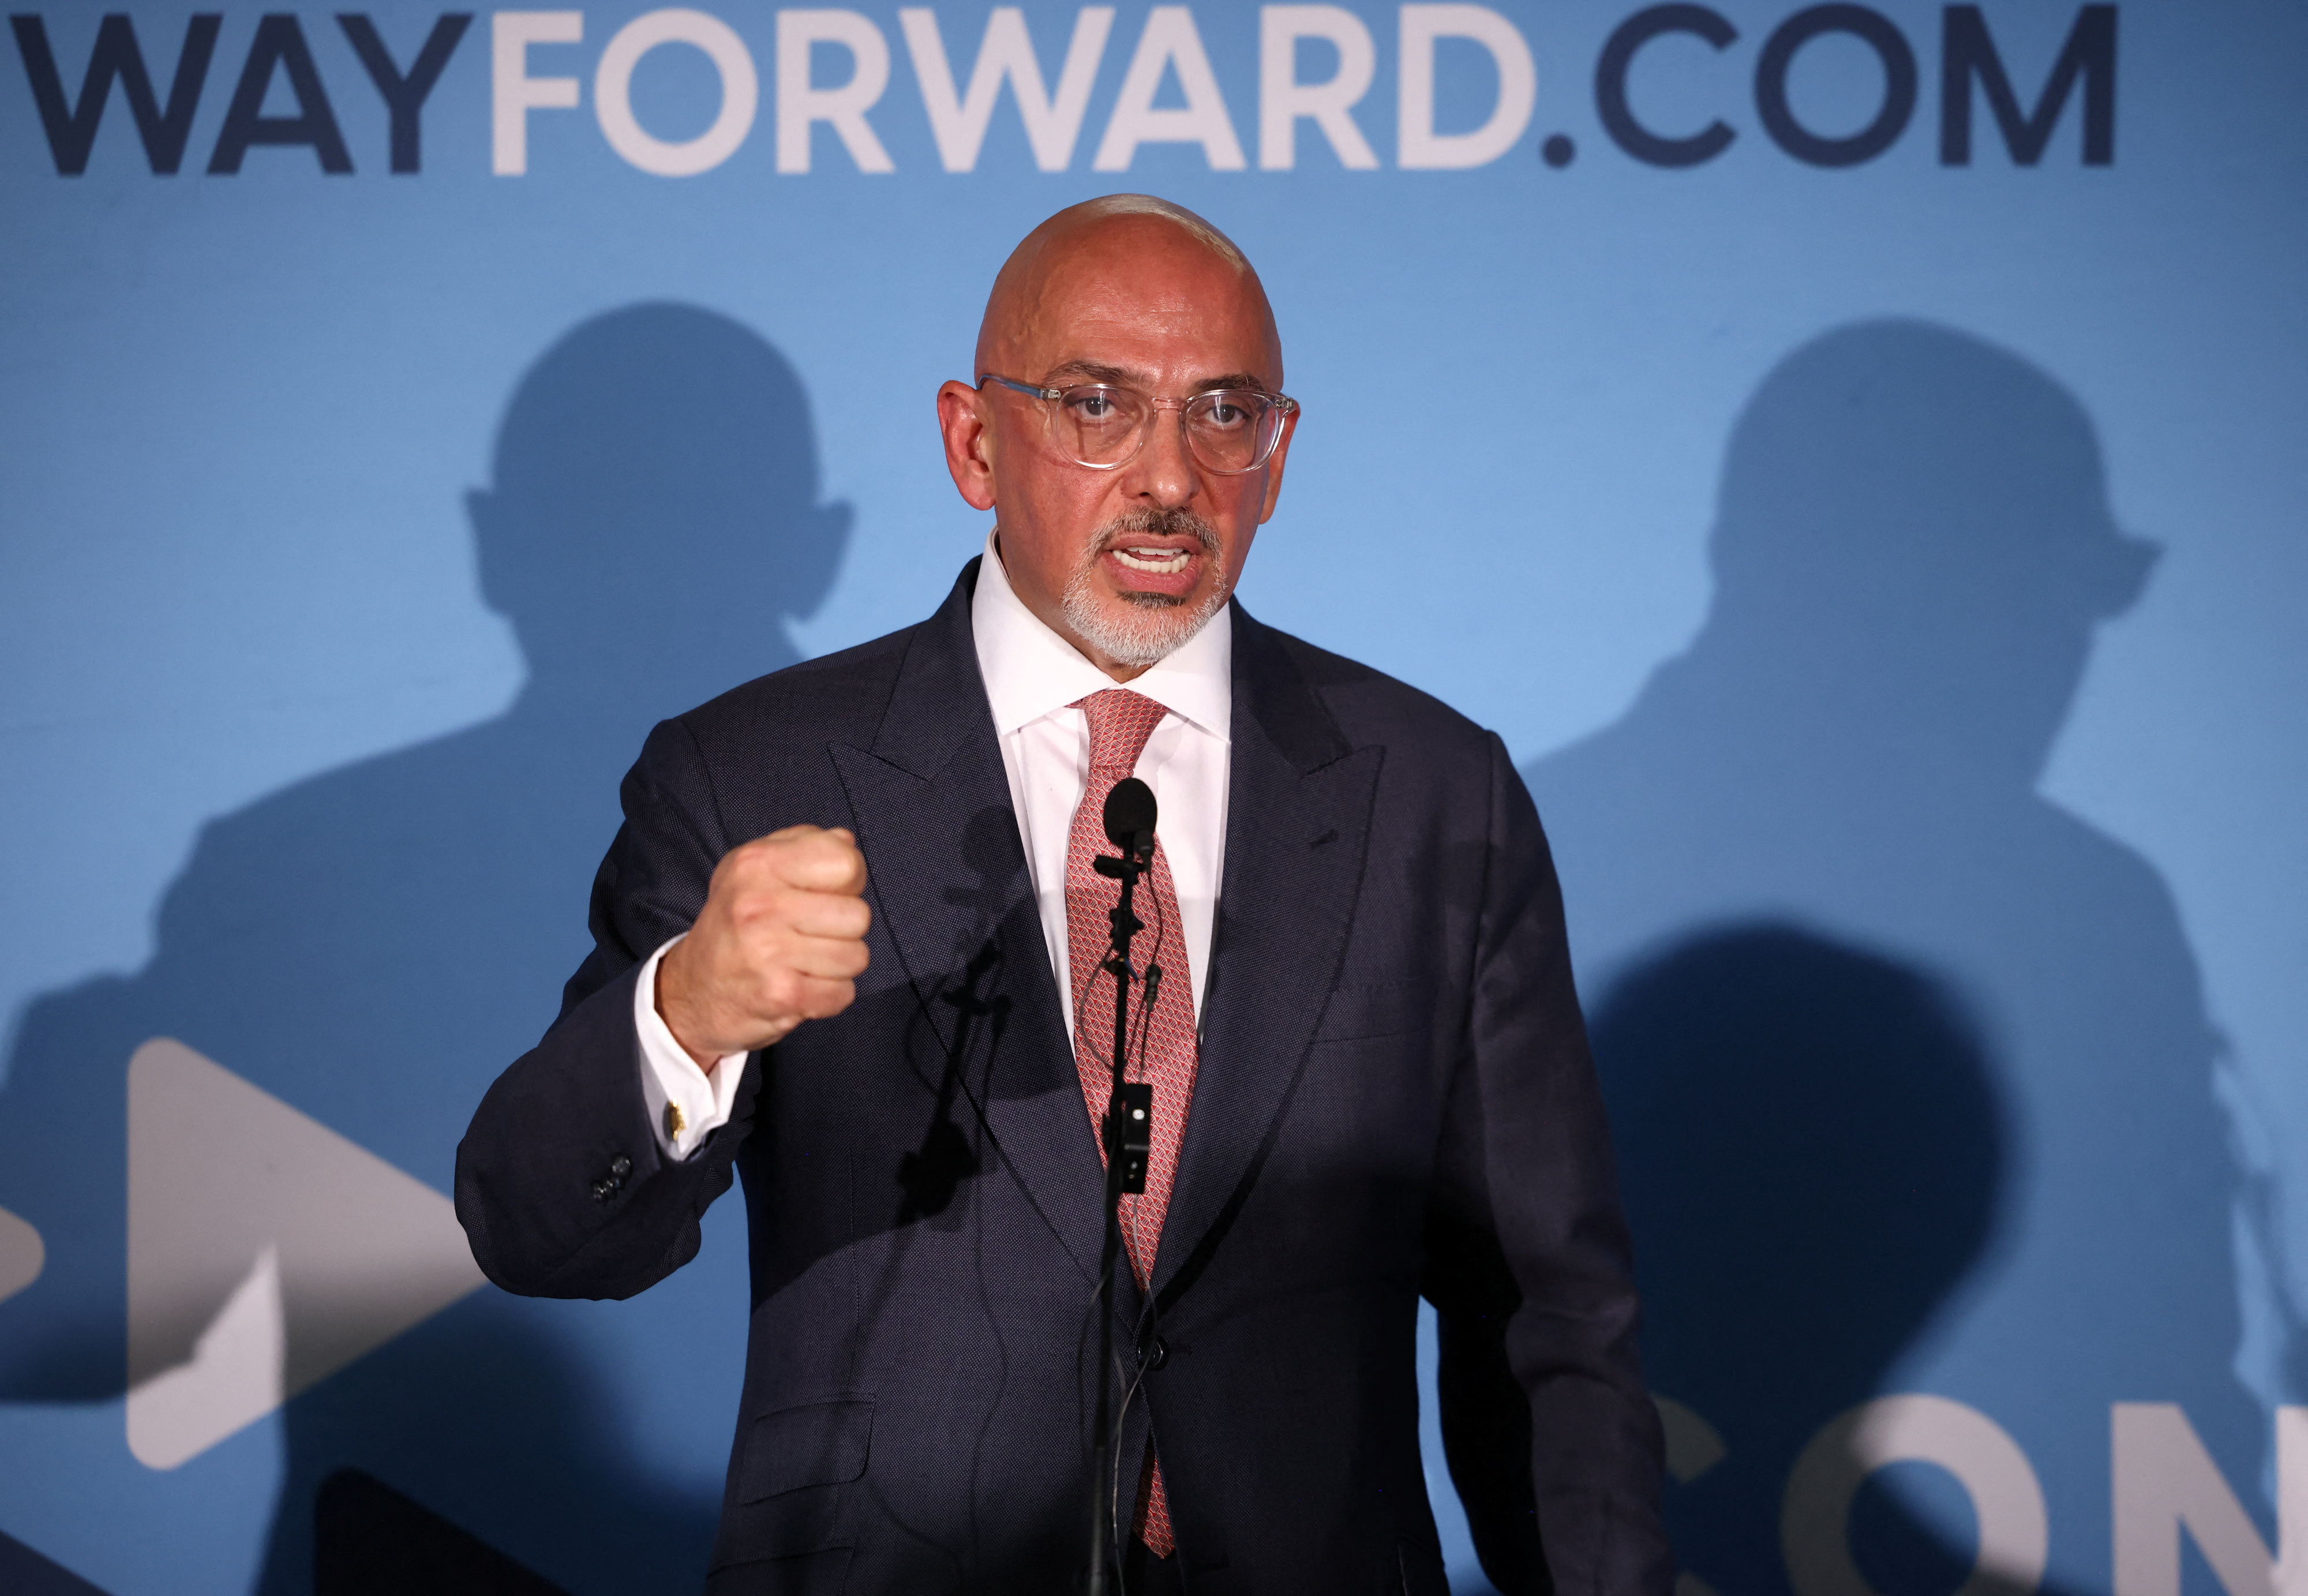 British Chancellor of the Exchequer and Conservative leadership candidate Nadhim Zahawi attends the Conservative Way Forward launch event in London